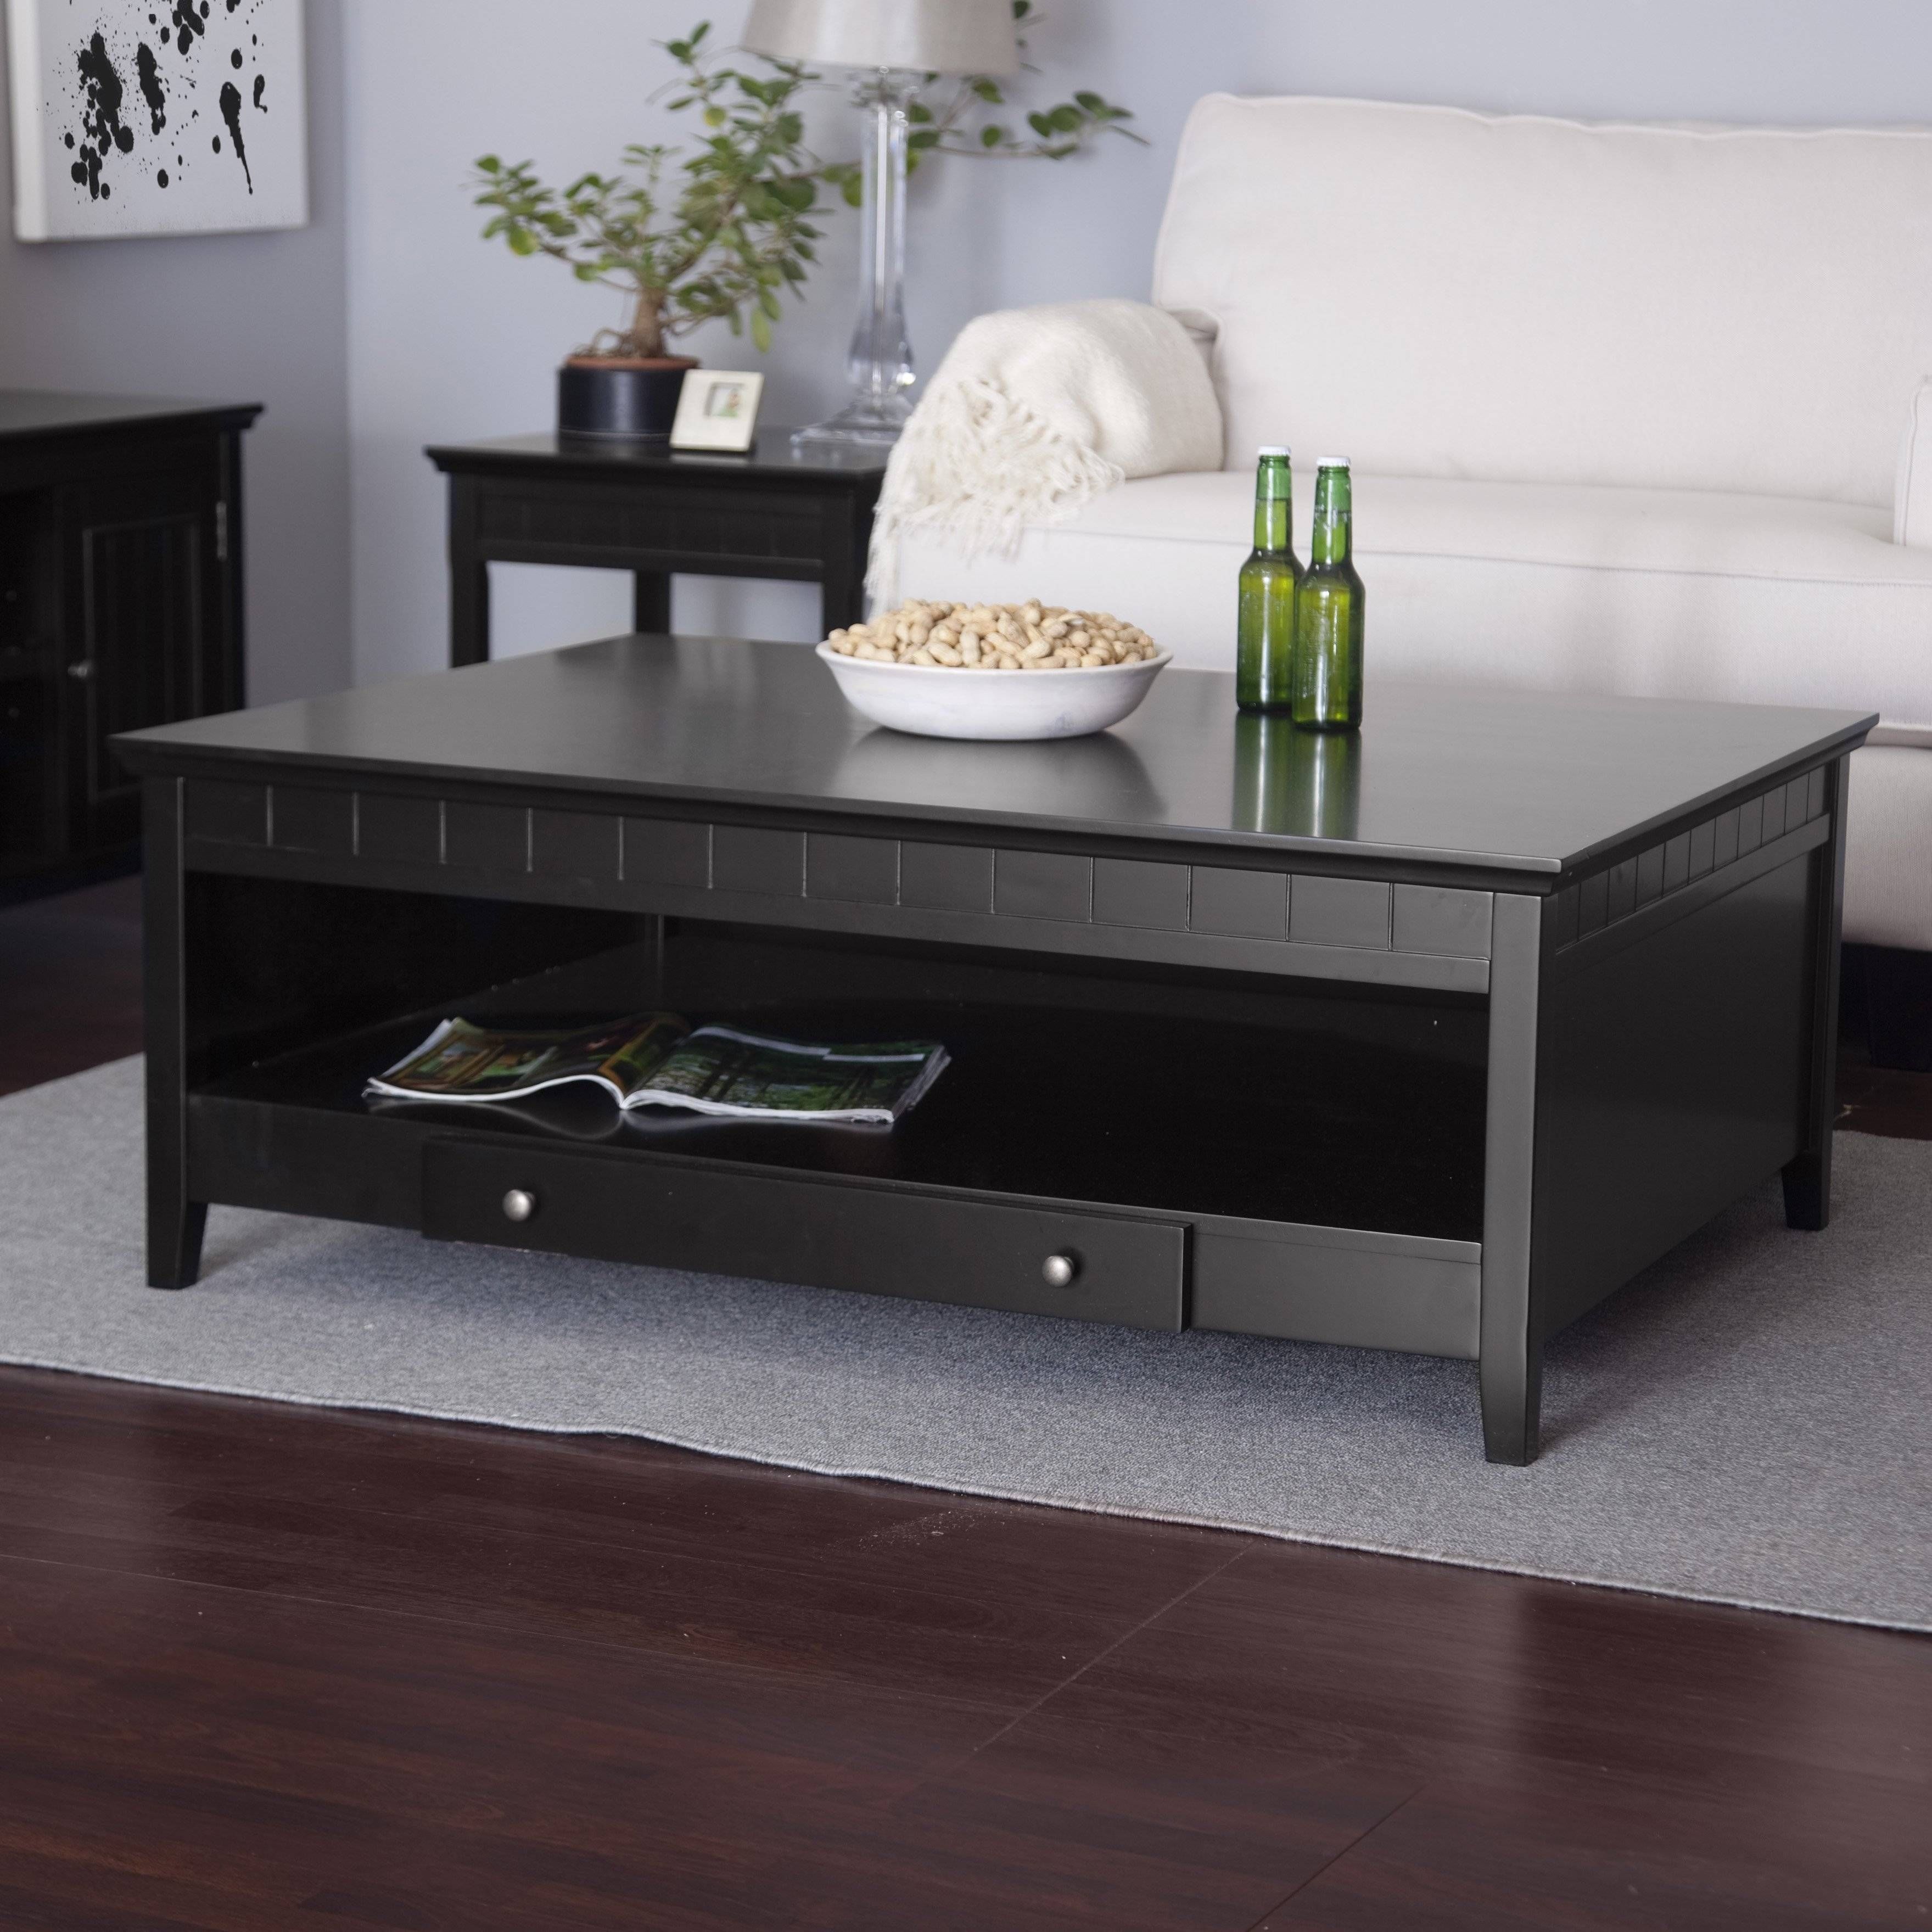 Coffee Table: Brilliant Square Black Coffee Table Designs Square Pertaining To Small Coffee Tables With Shelf (View 19 of 30)